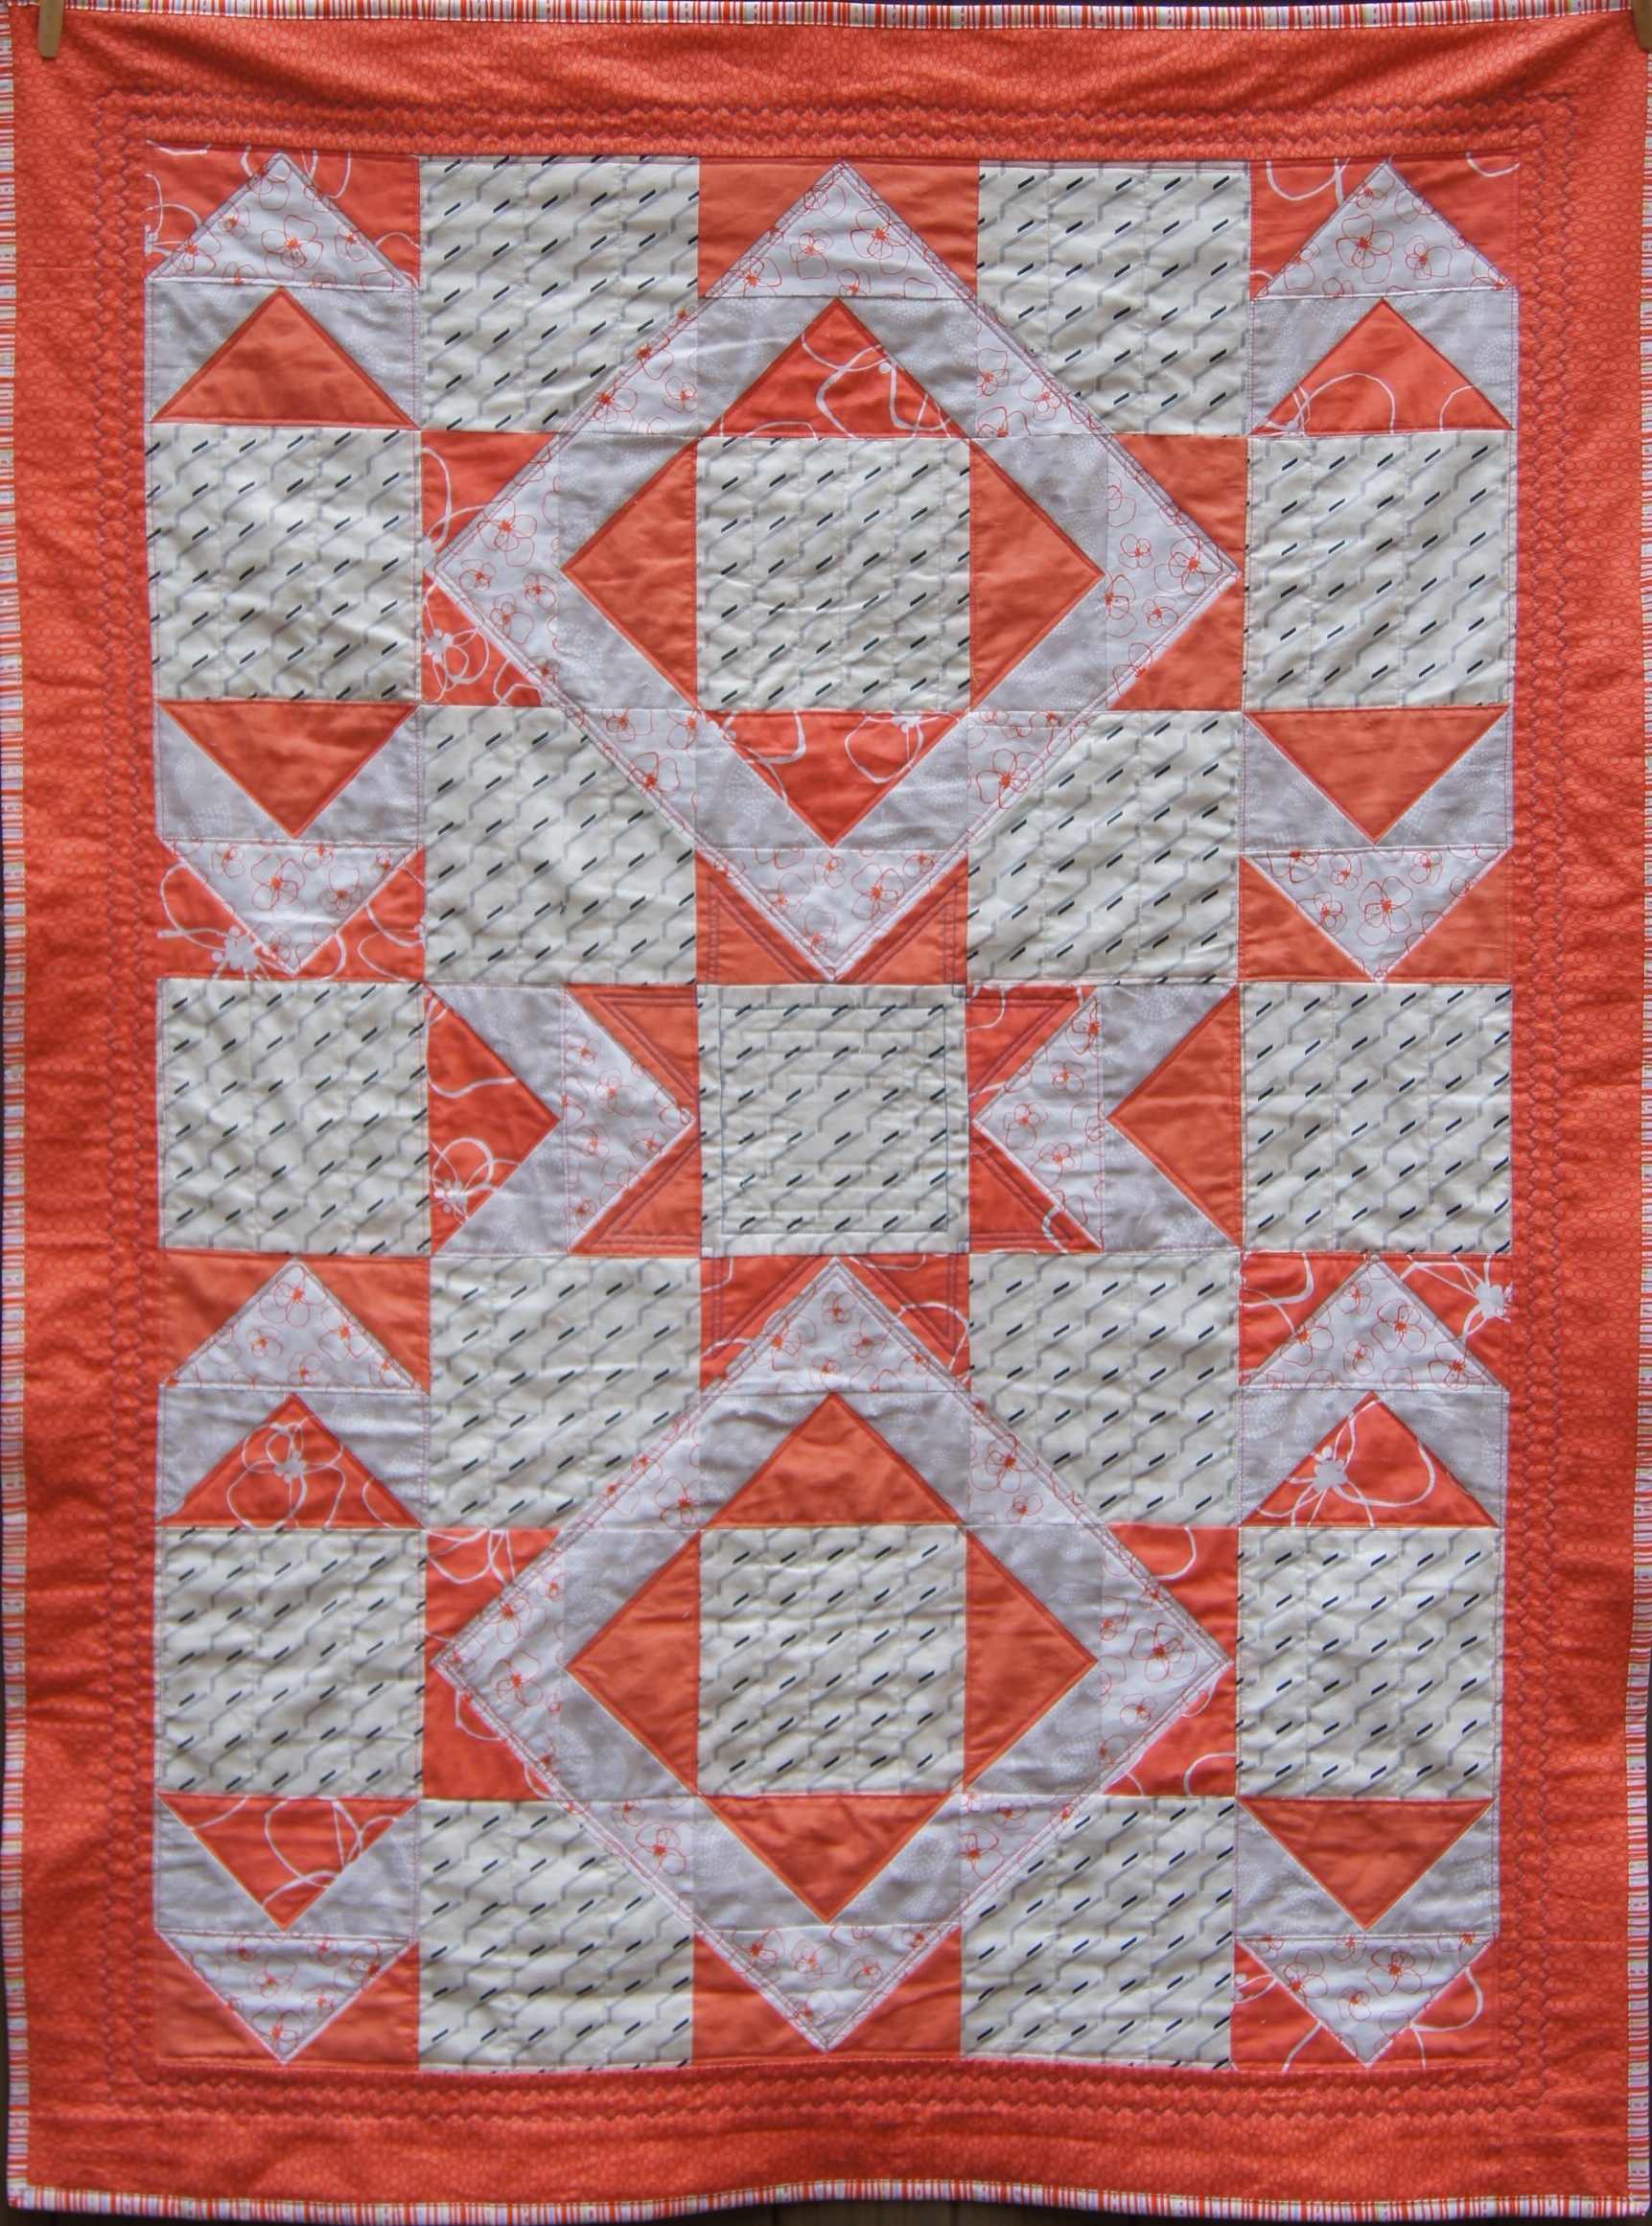 Quilt Modern Flying Geese Double Square, Single Star.jpg